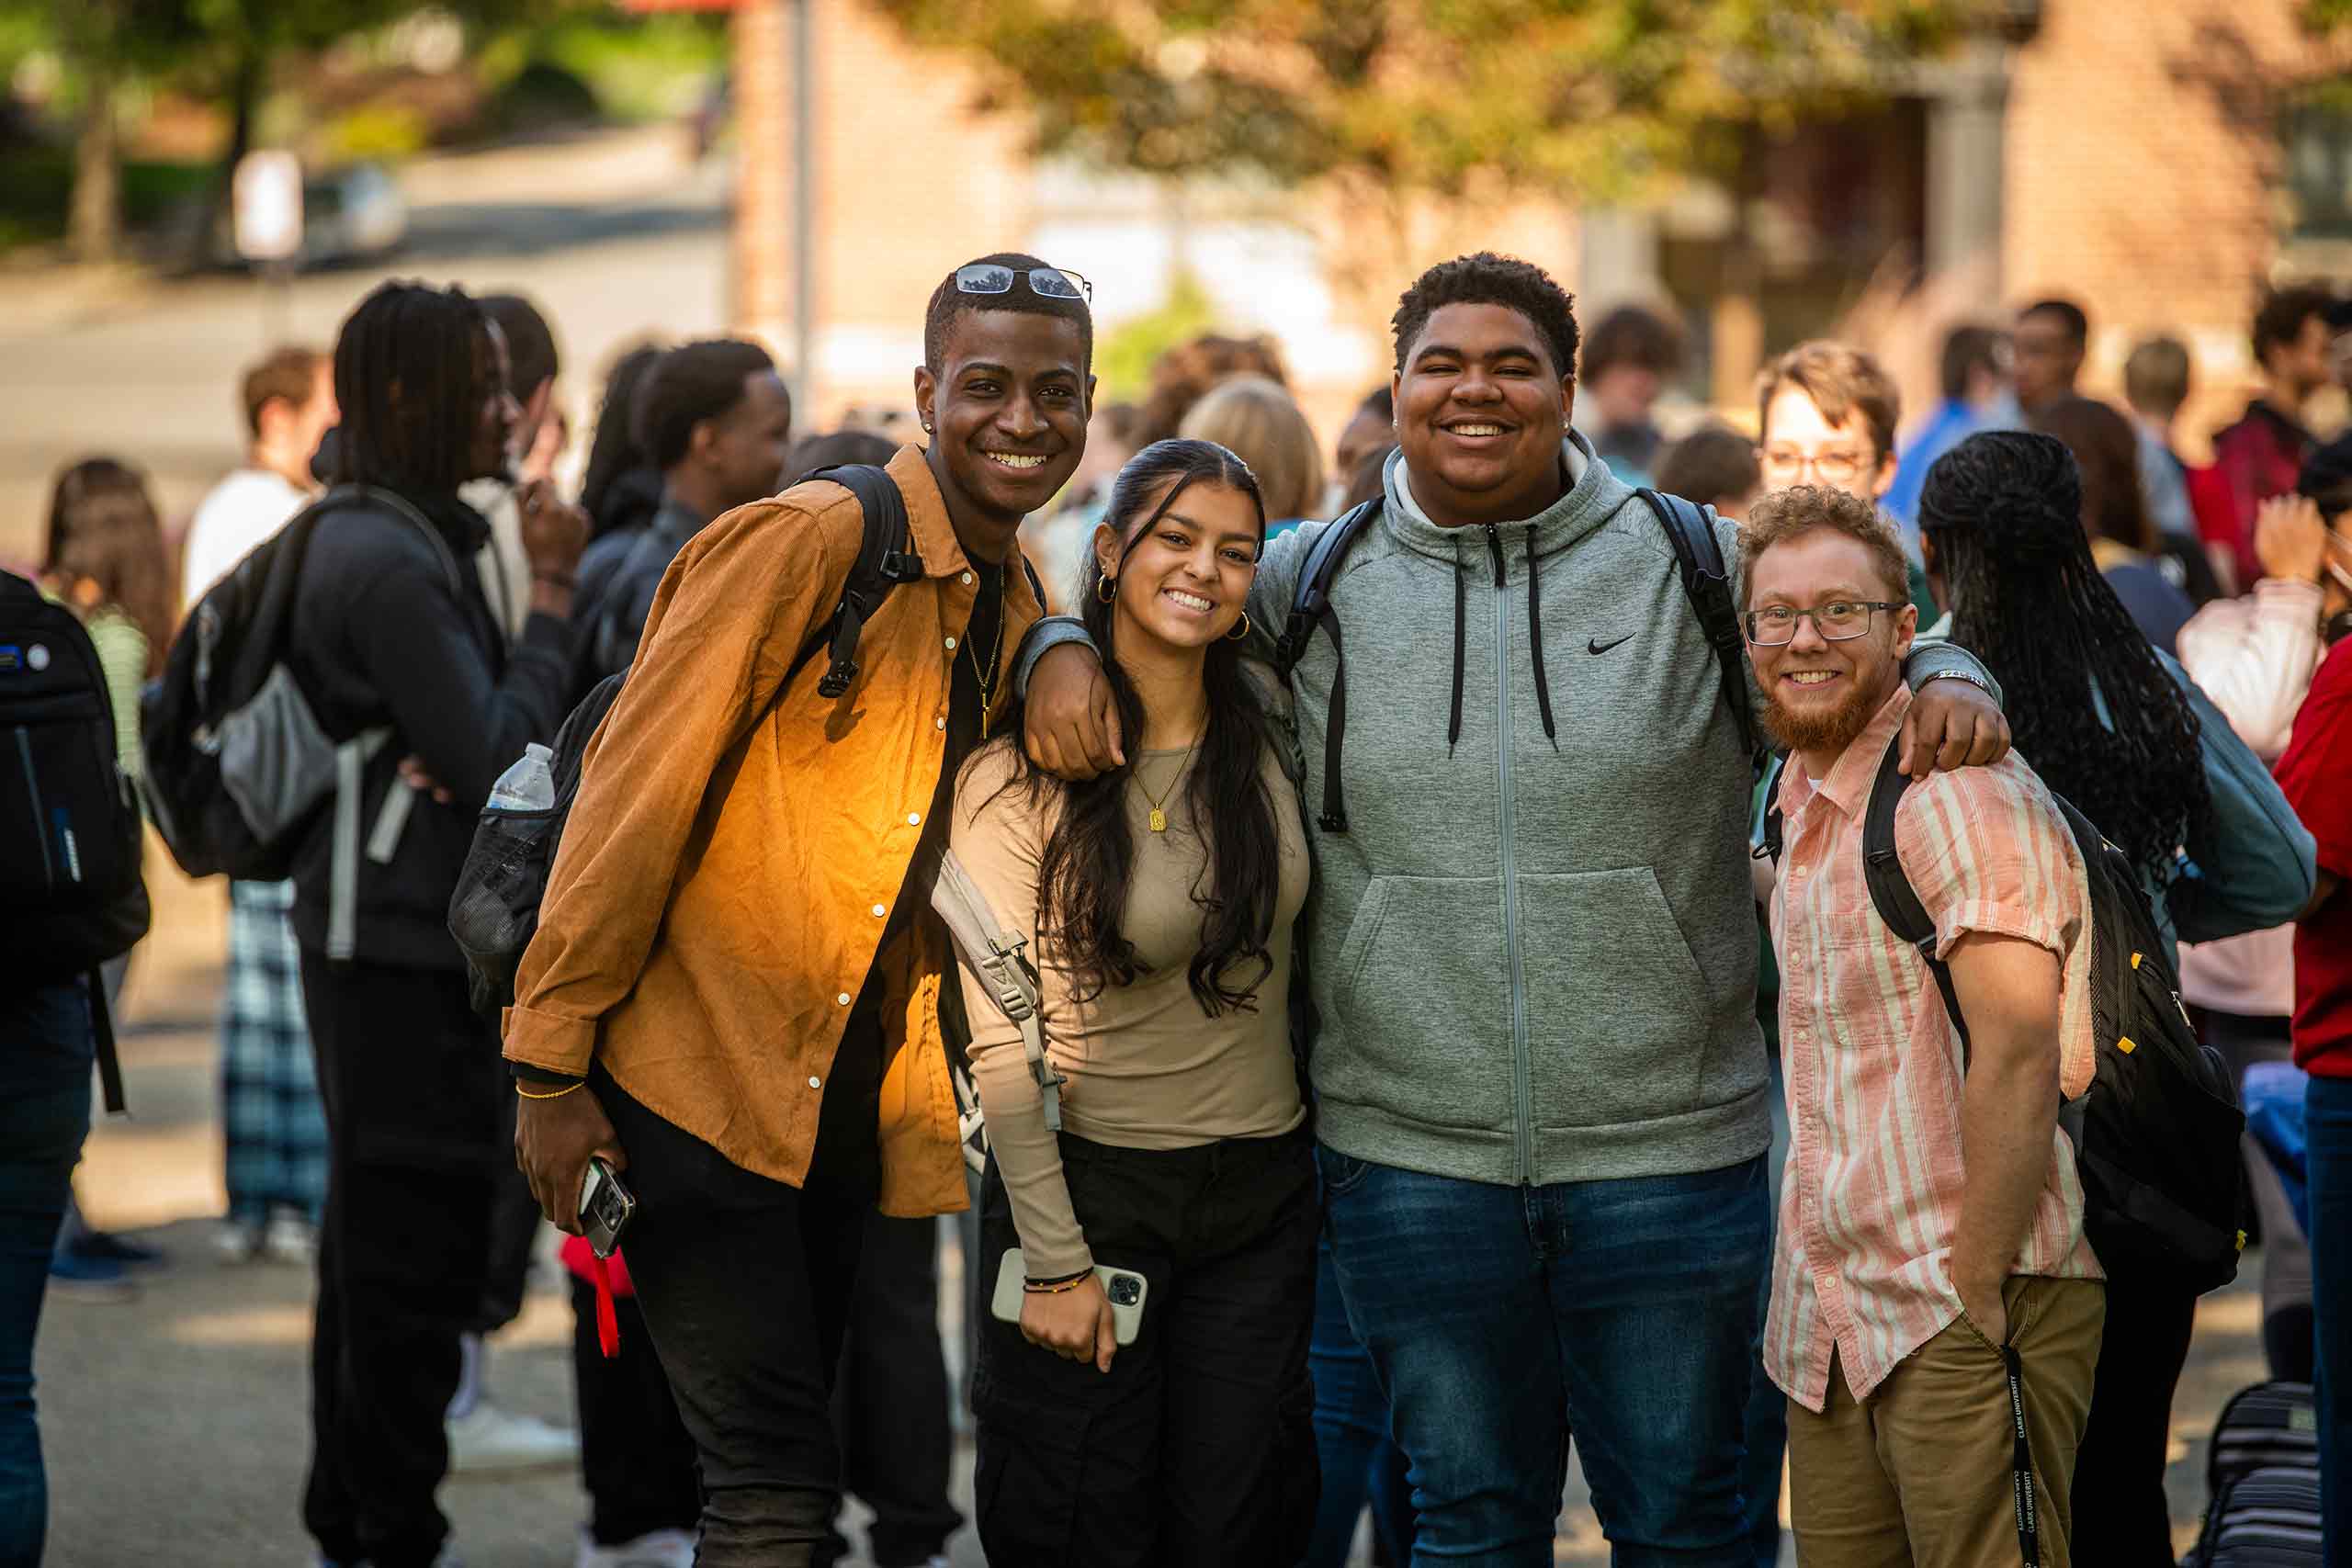 A group of smiling student poses for a picture during #FreshCheckDay, Clark University